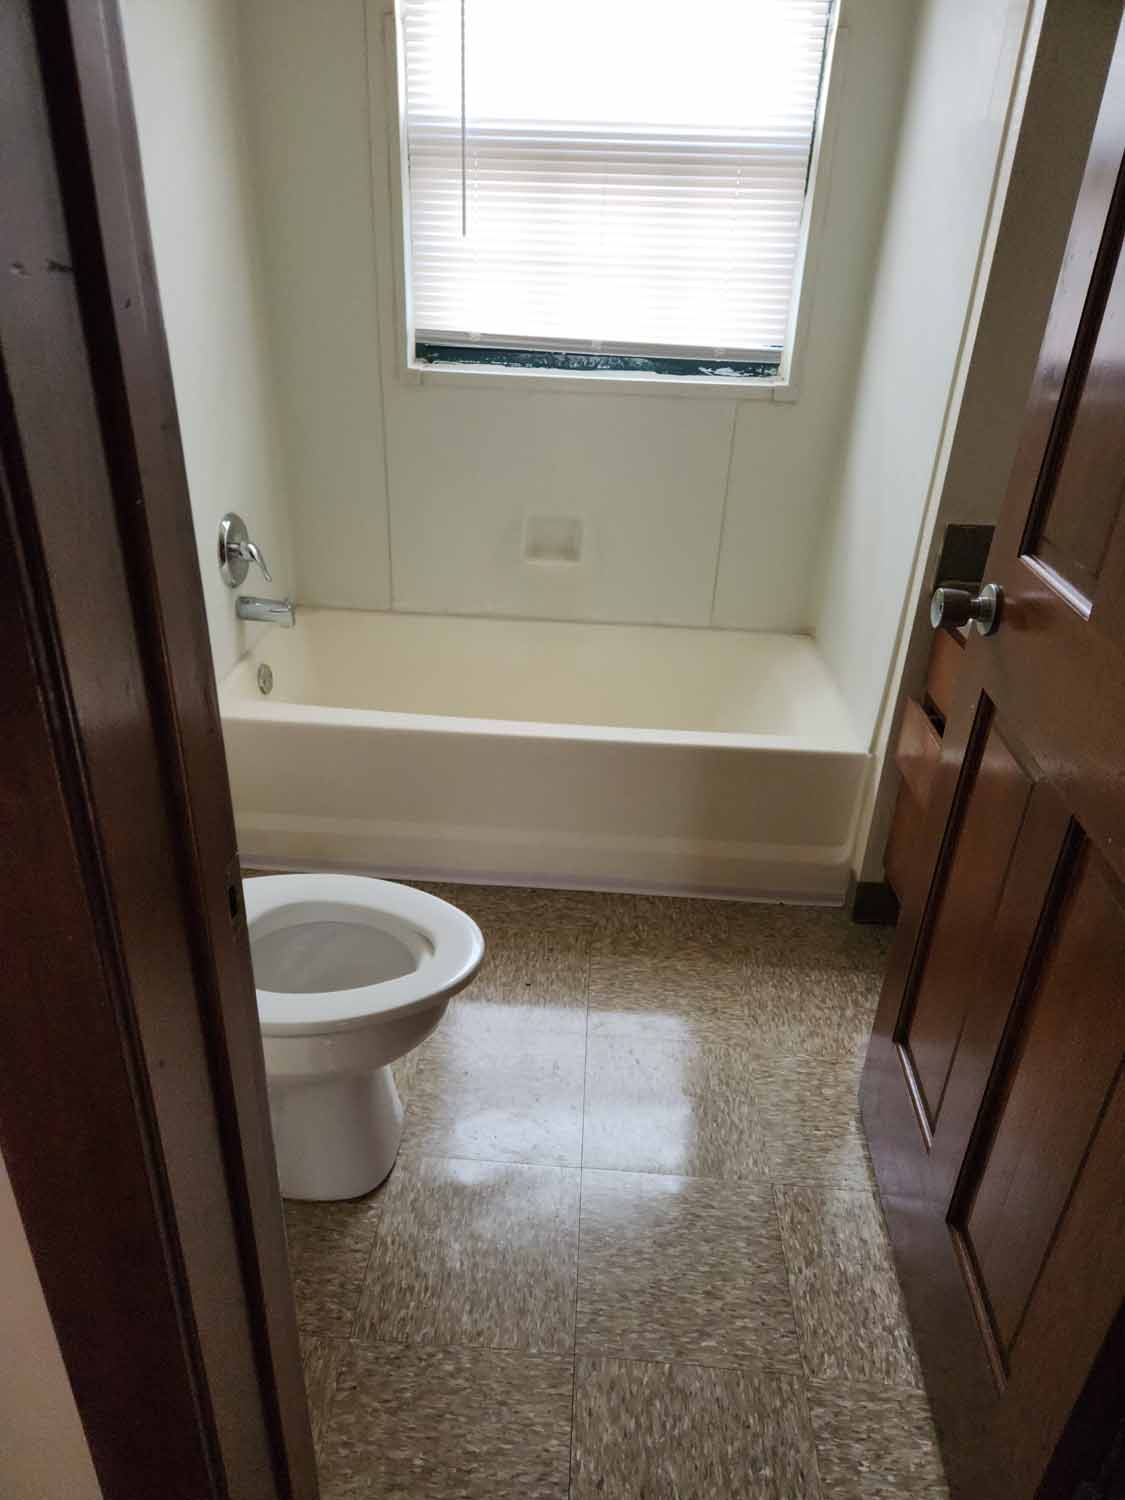 A bathroom with view of a toilet.